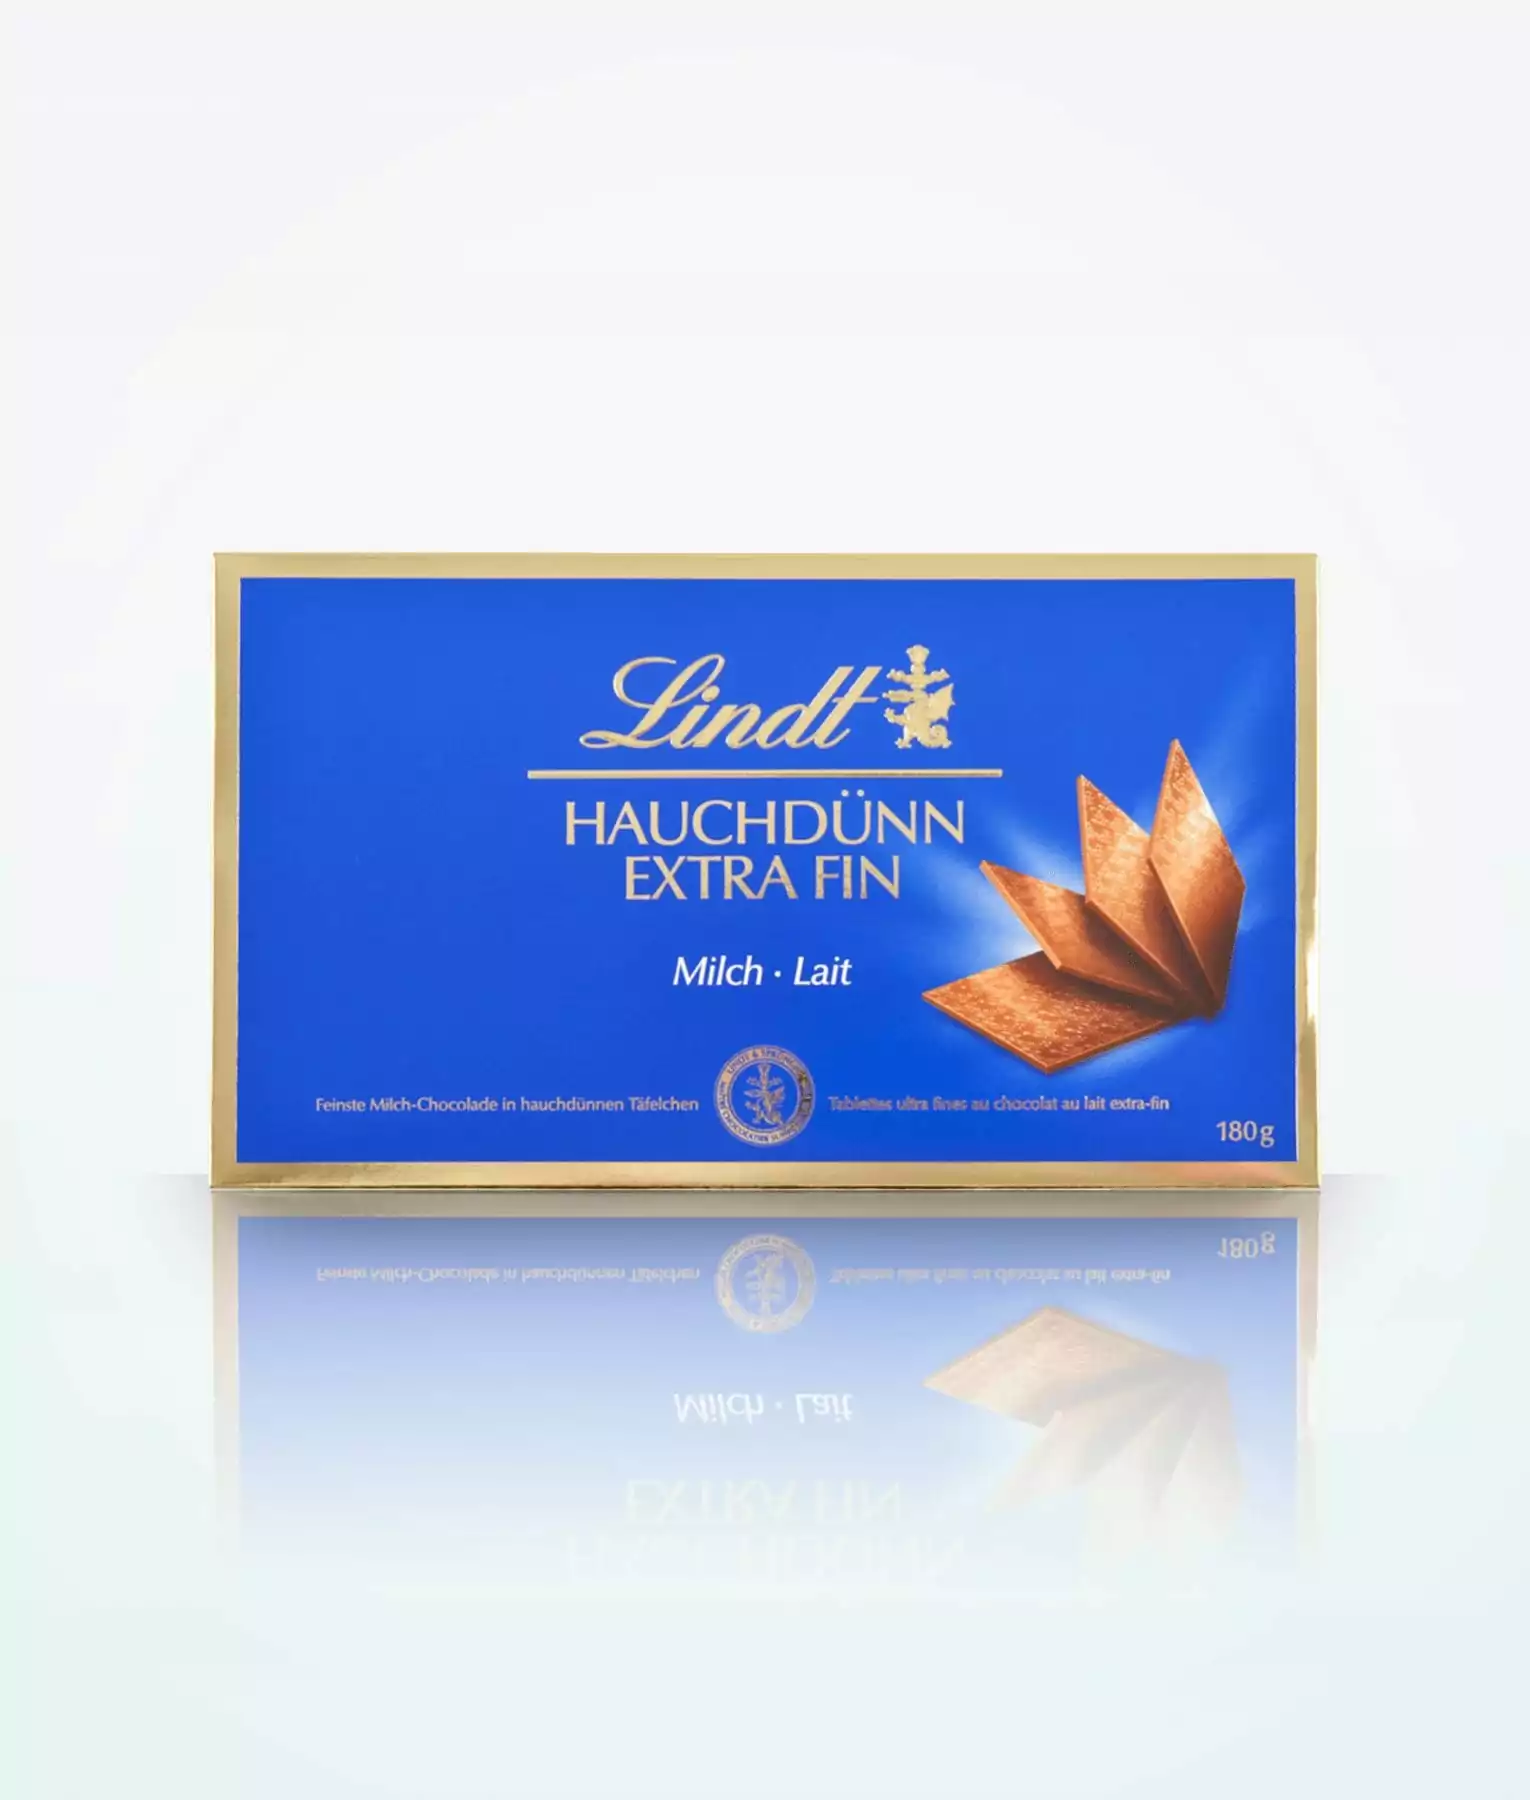 Lindt chocolate flavors